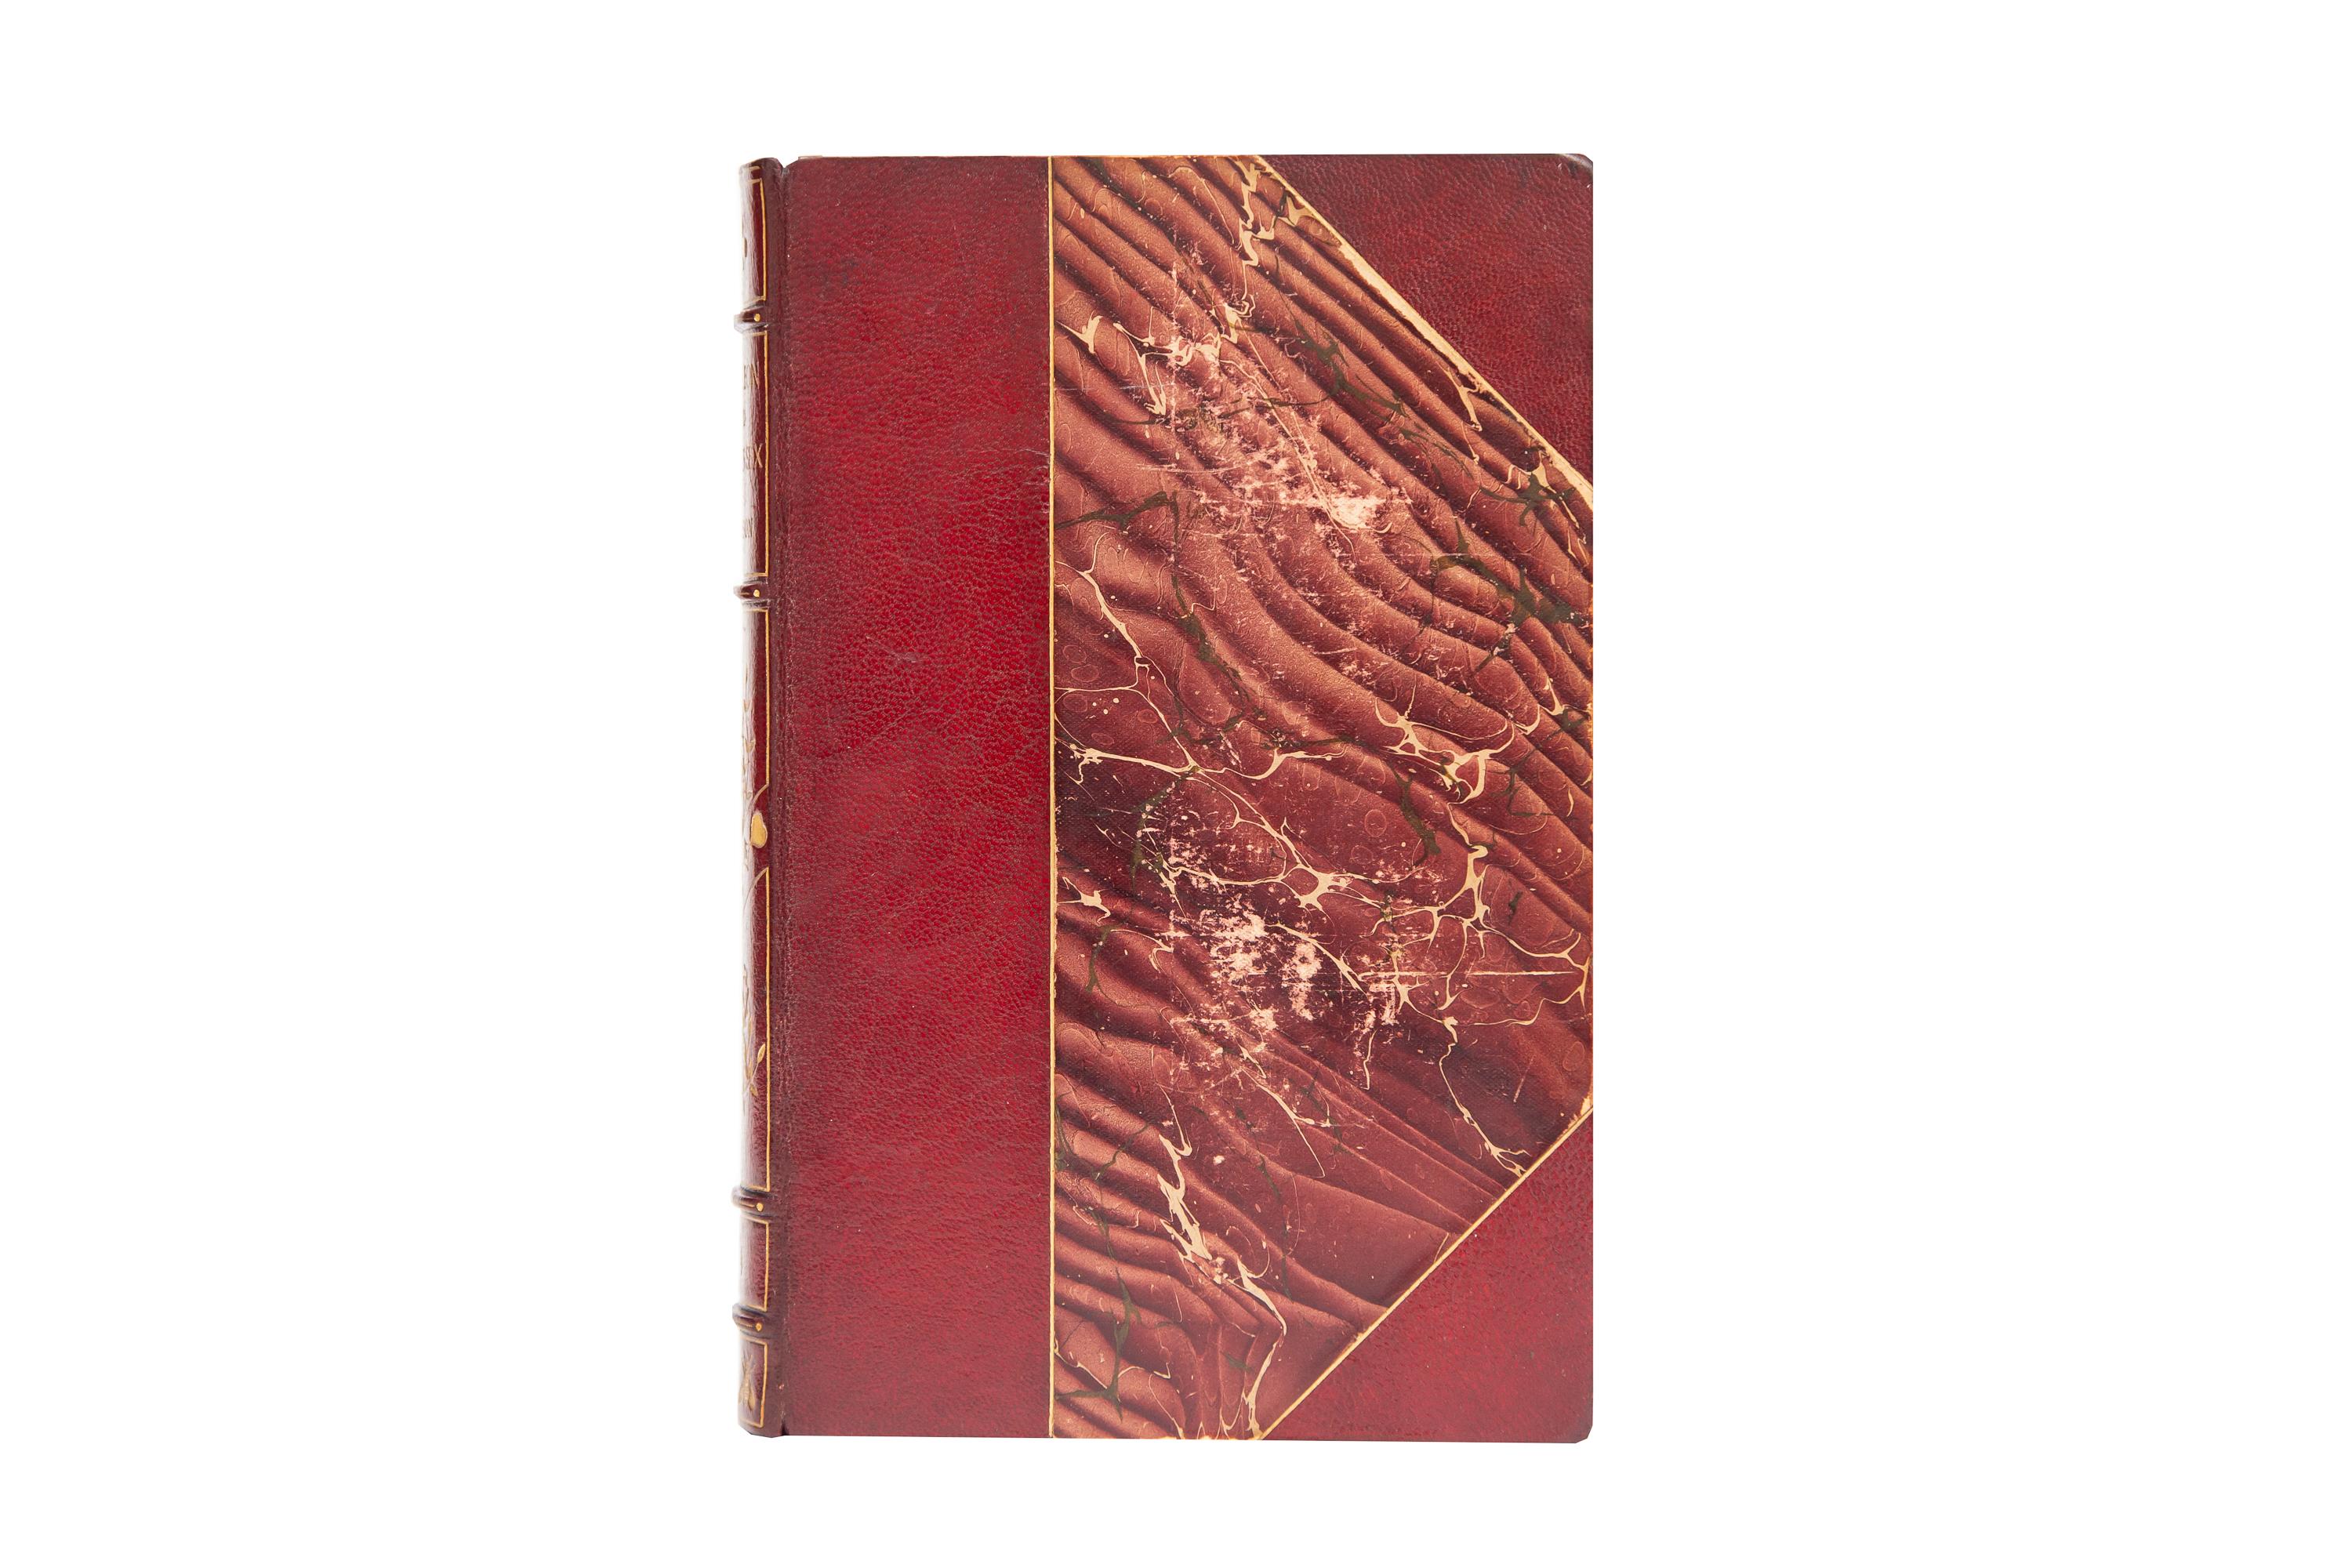 1 Volume. Frederic Masson, Napoleon and the Fair Sex. Bound in 3/4 red morocco and marbled boards by Hatchards. Raised bands gilt with panels displaying hearts and arrows, Napoleonic wreaths, and bee emblems as well as label lettering in gilt. The